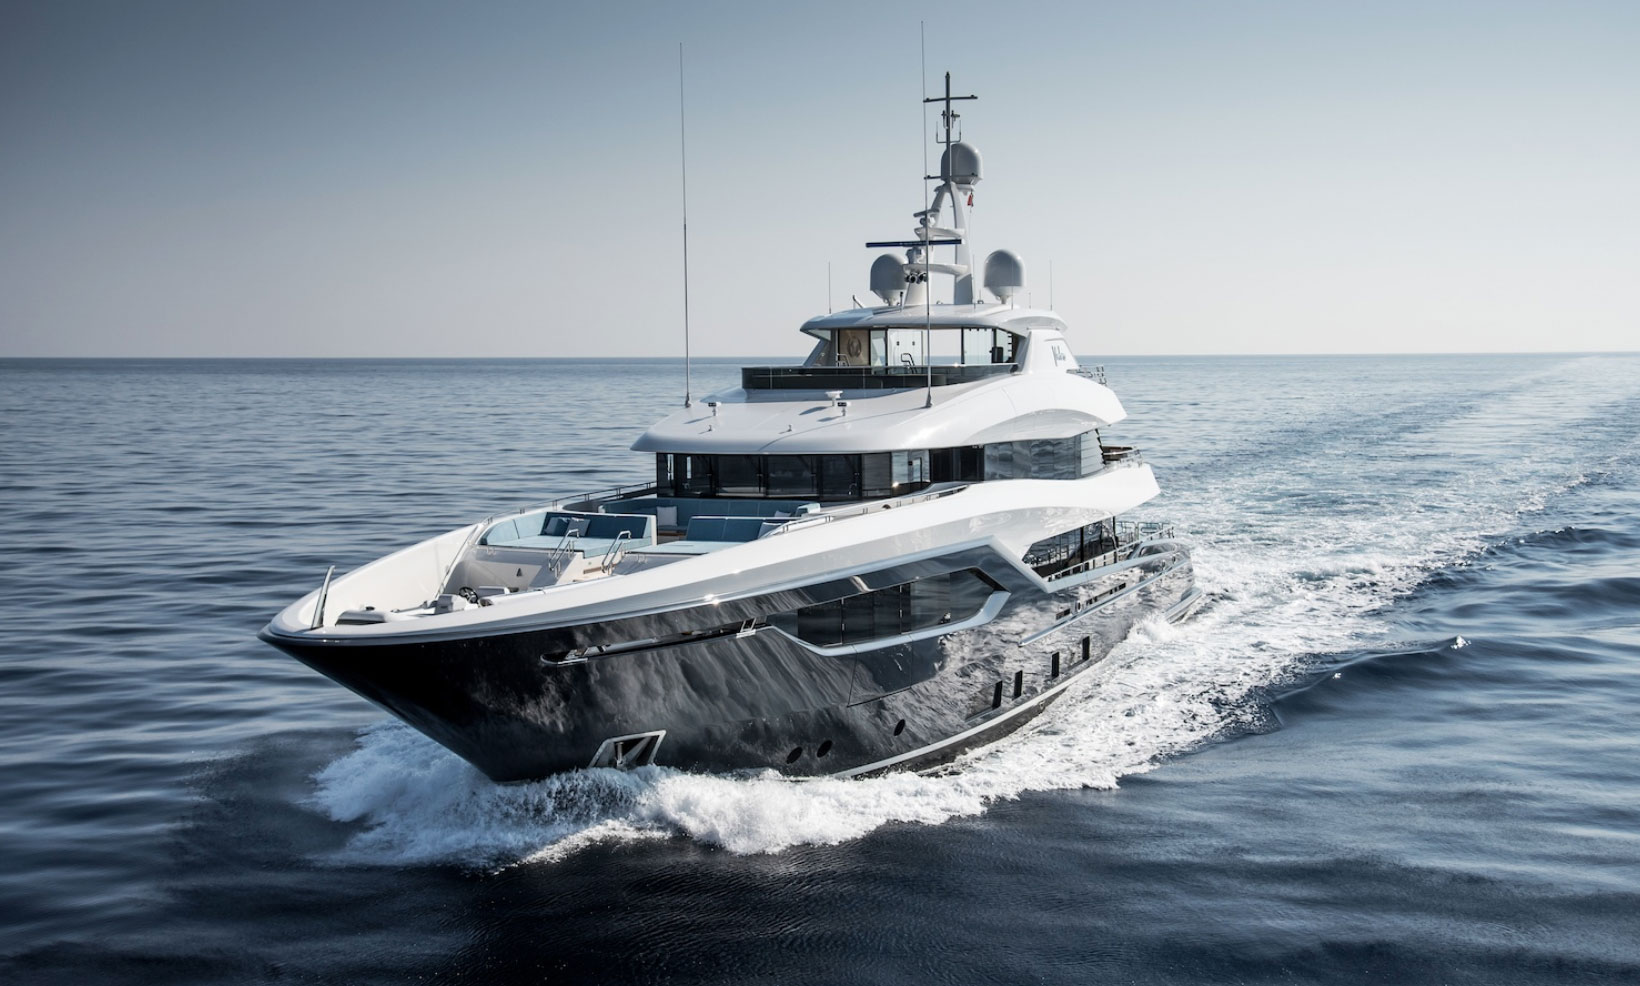 displacement motor yachts